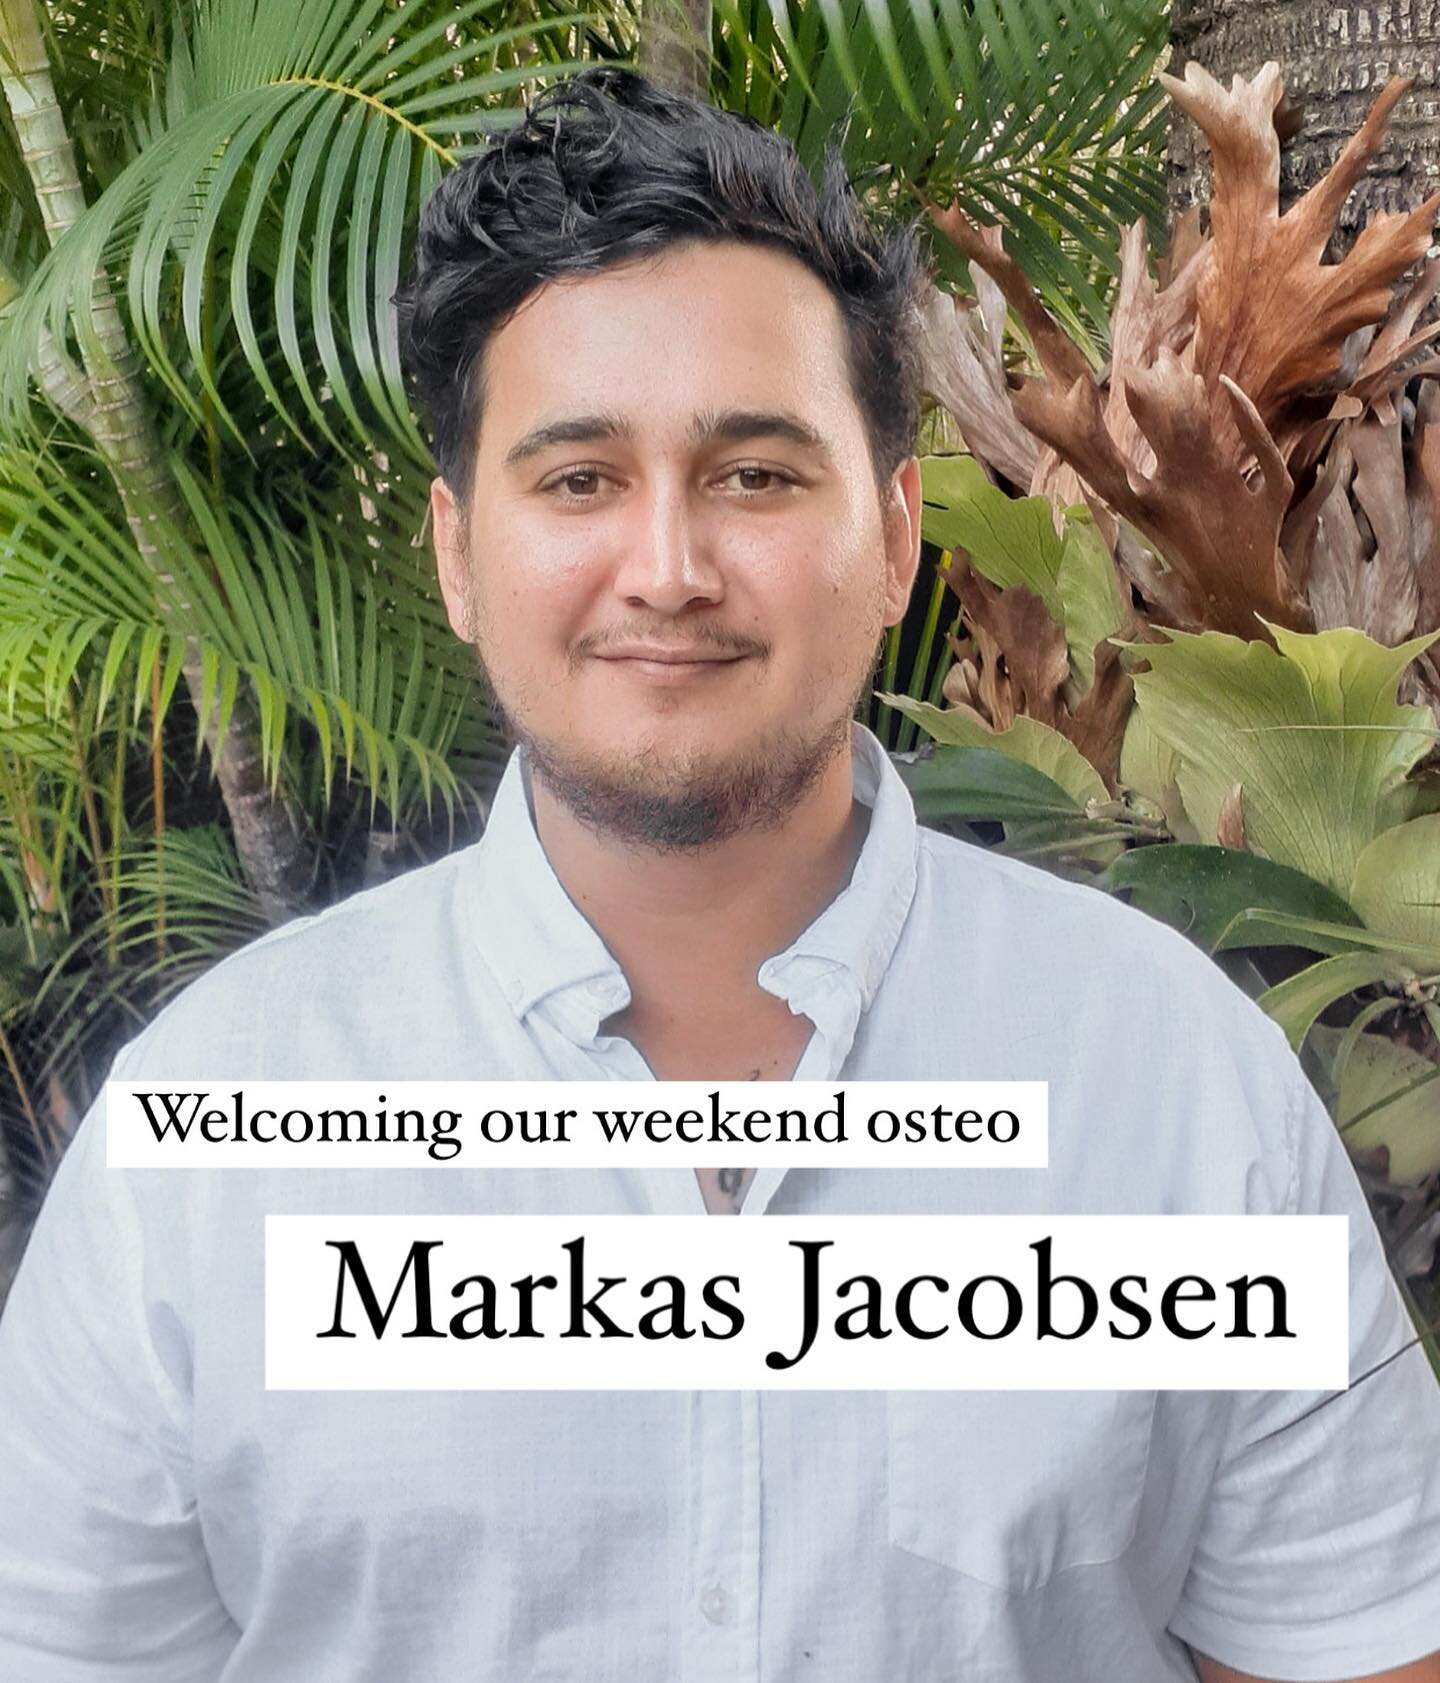 And our team grows 🙌🏽 

Super excited to welcome our new osteopath Dr Markas Jacobsen (Osteopath)

For all of you working 9-5 Monday to Friday, Markas has you covered. 

He is available;
- Tuesday afternoons 3:30pm-7pm
- Saturday 8am-3pm
- Sunday 9